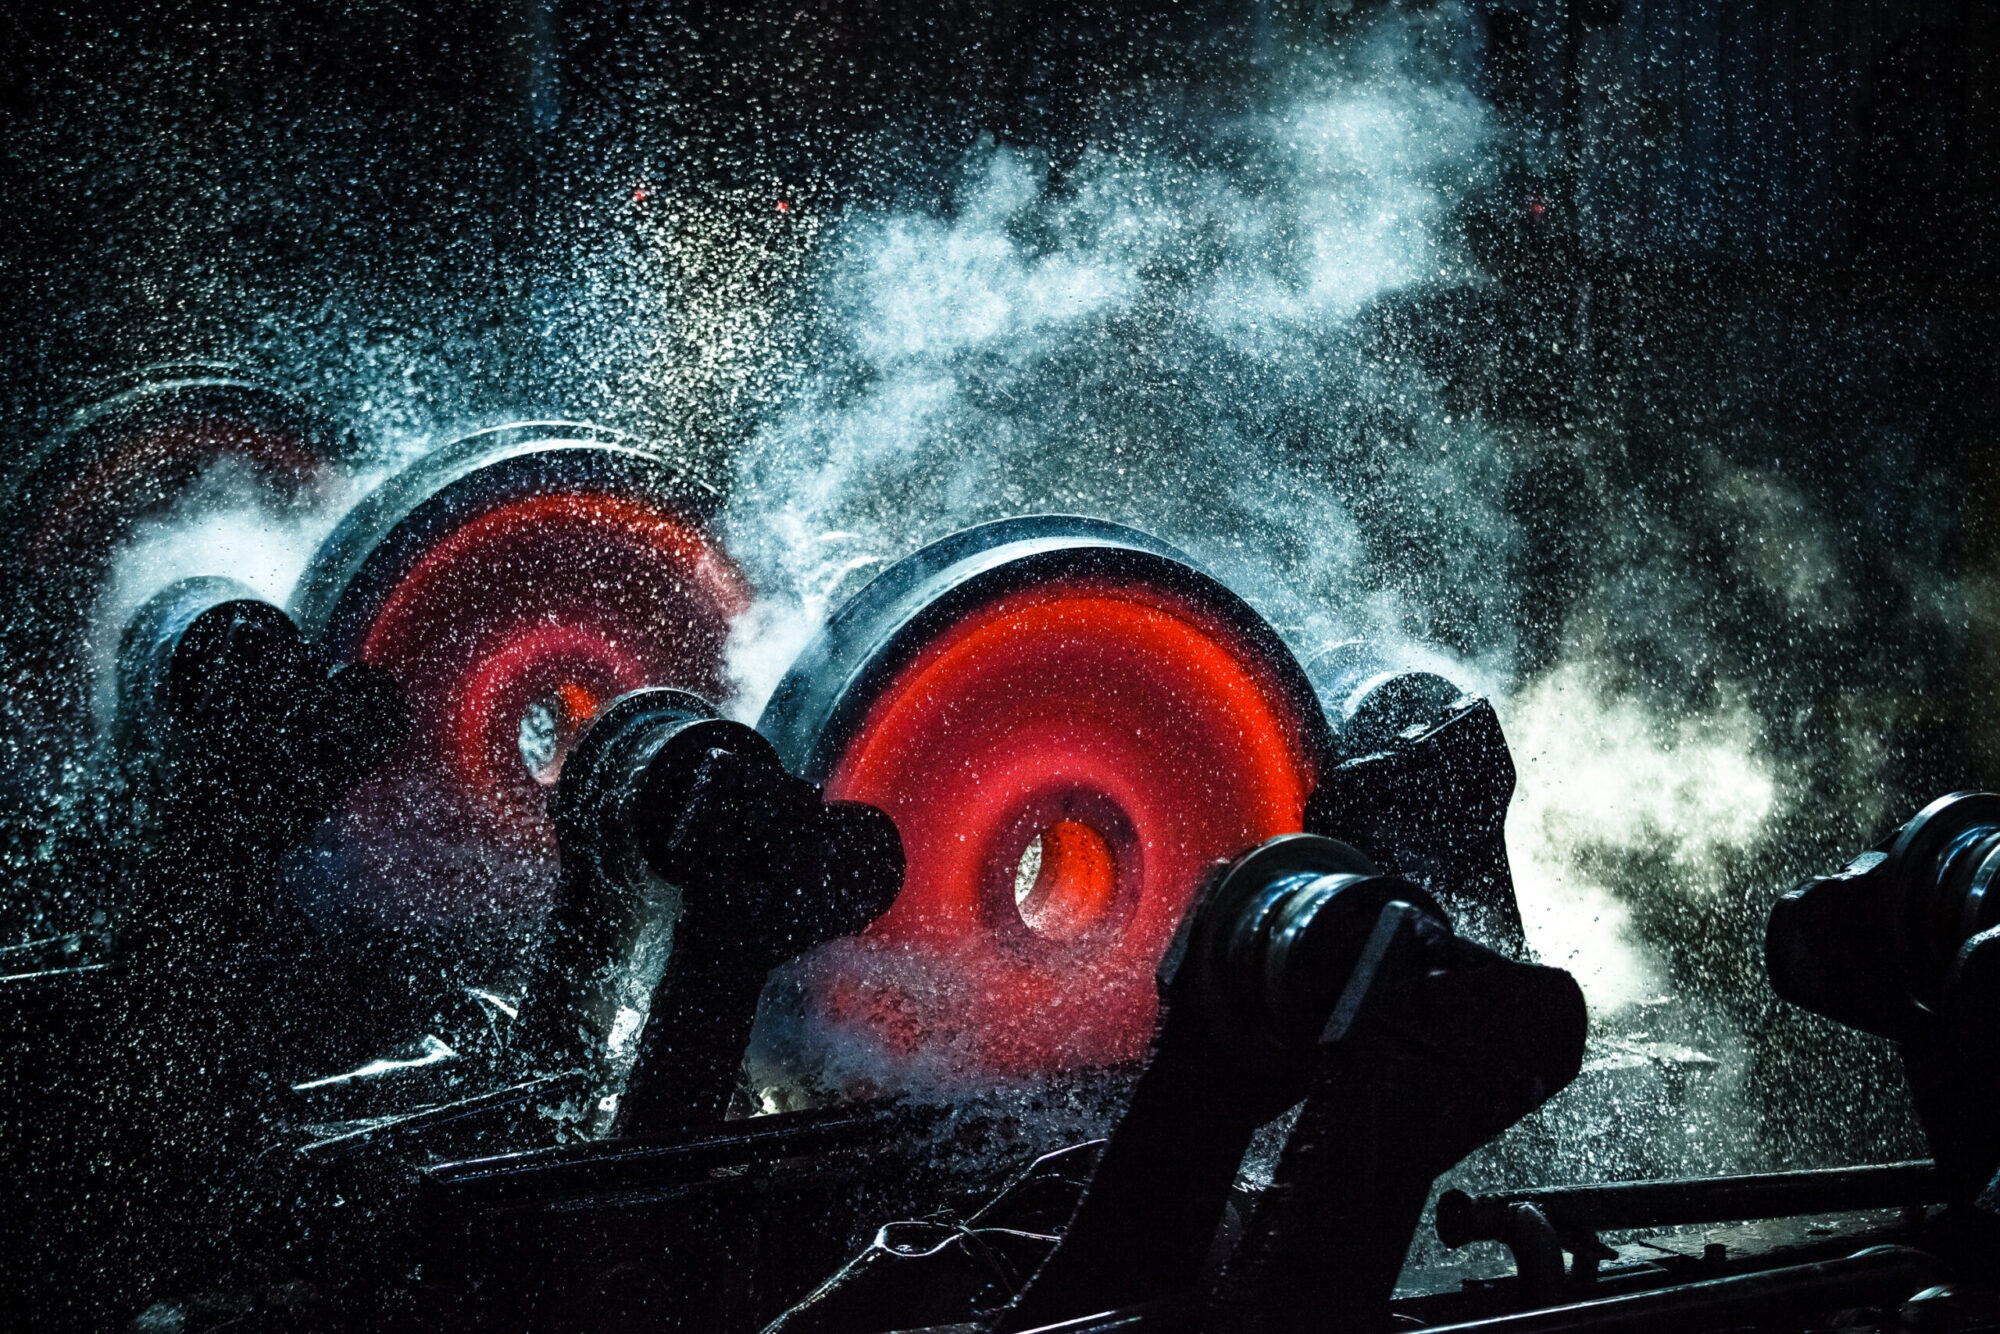 Production of the railway wheels at the Vyksa Steel Works